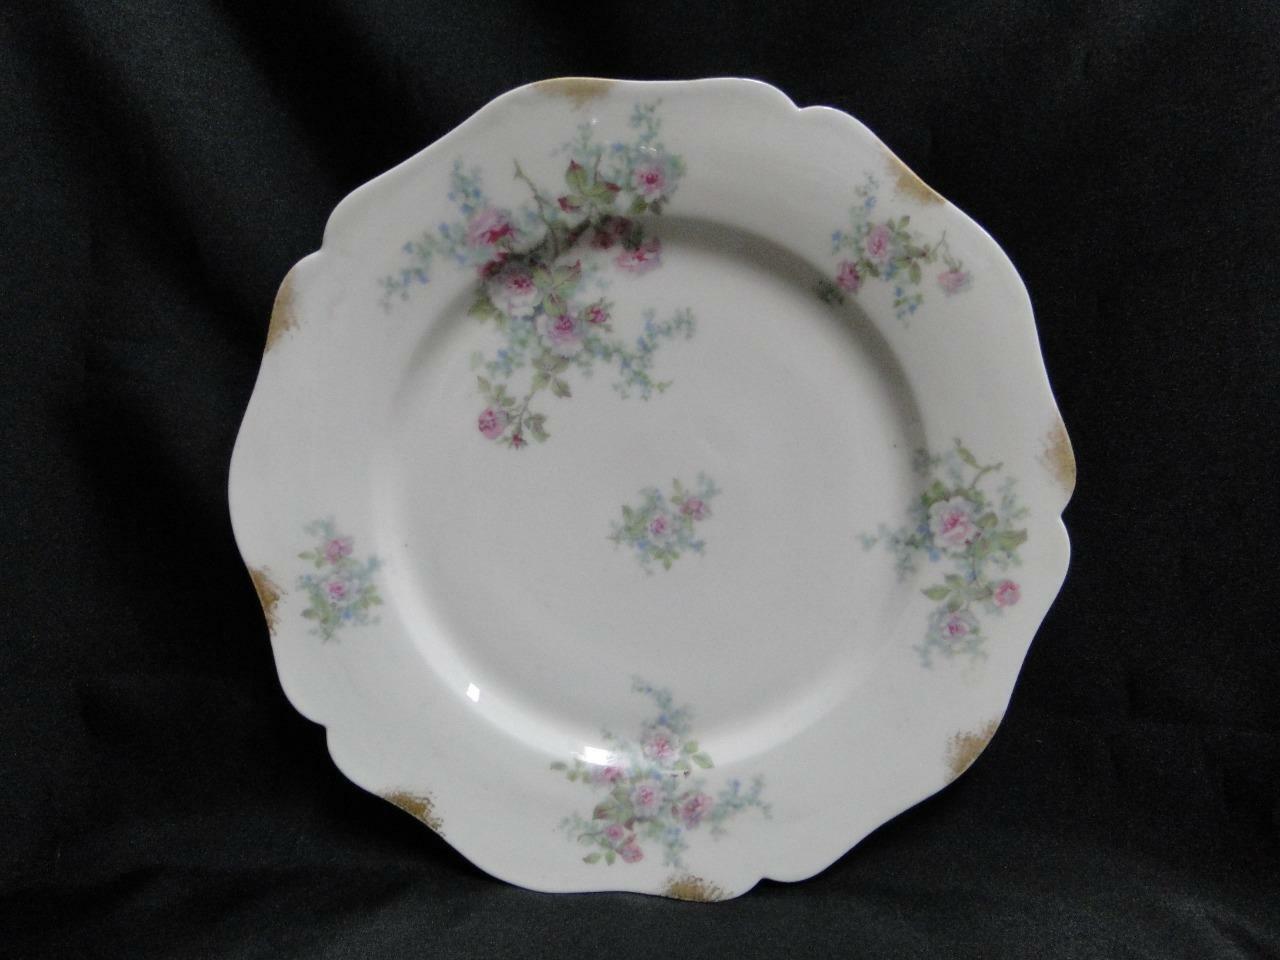 Wm Guerin, Limoges, Pink Roses, Blue, Green: Dinner Plate (s), 9 3/4", As Is